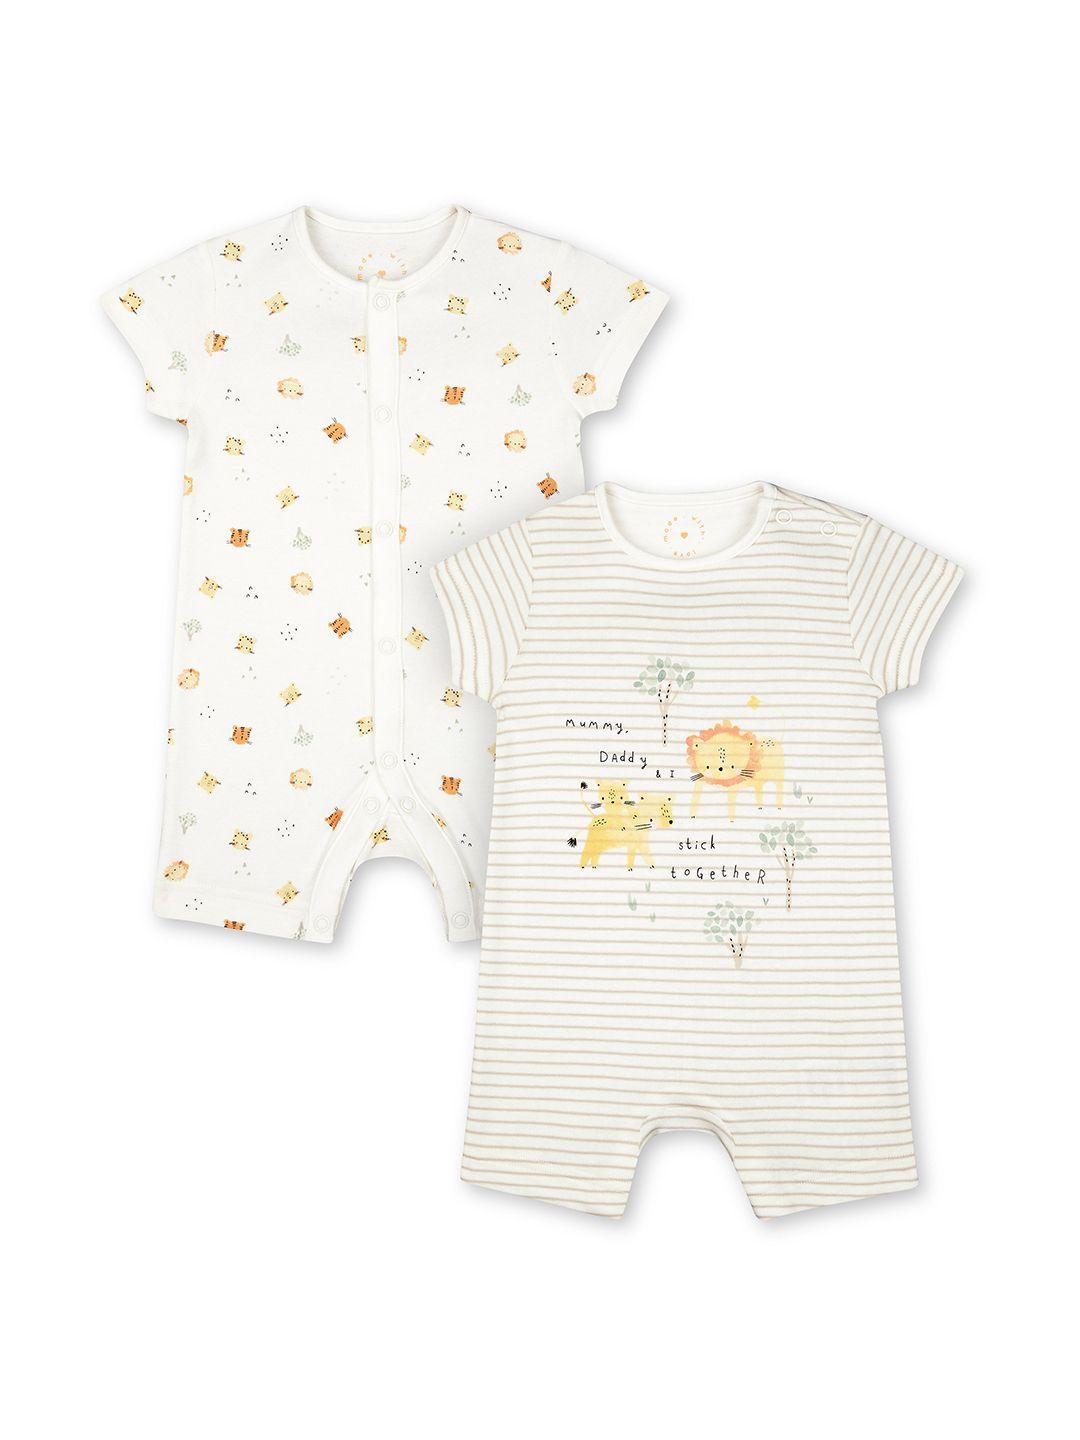 mothercare-unisex-kids-off-white-pack-of-2-animal-print-&-striped-round-neck-rompers